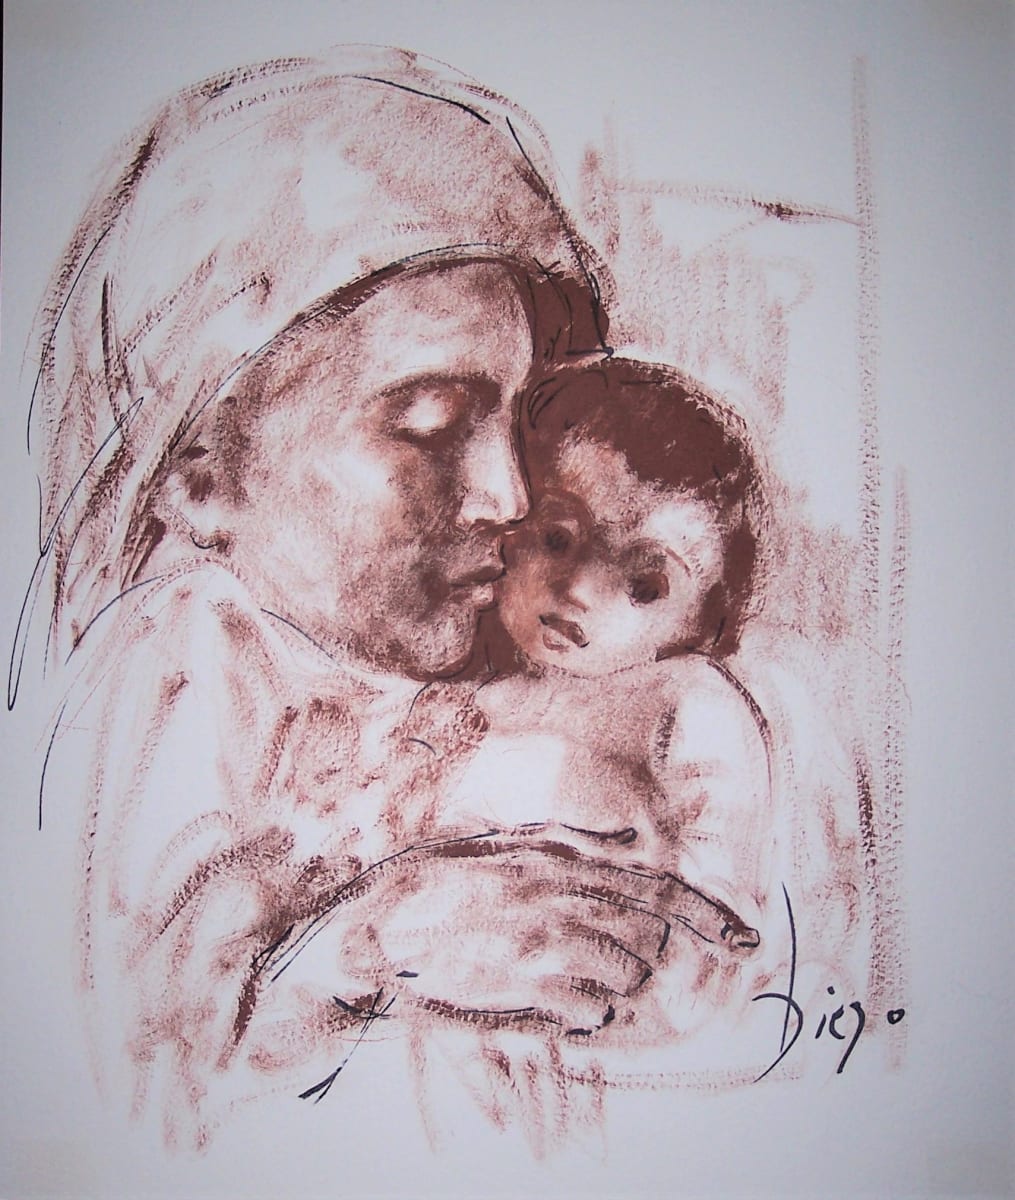 "Mother with Child on Right" CD21 by Antonio Diego Voci  Image: Mother with Child on Right by DIEGO